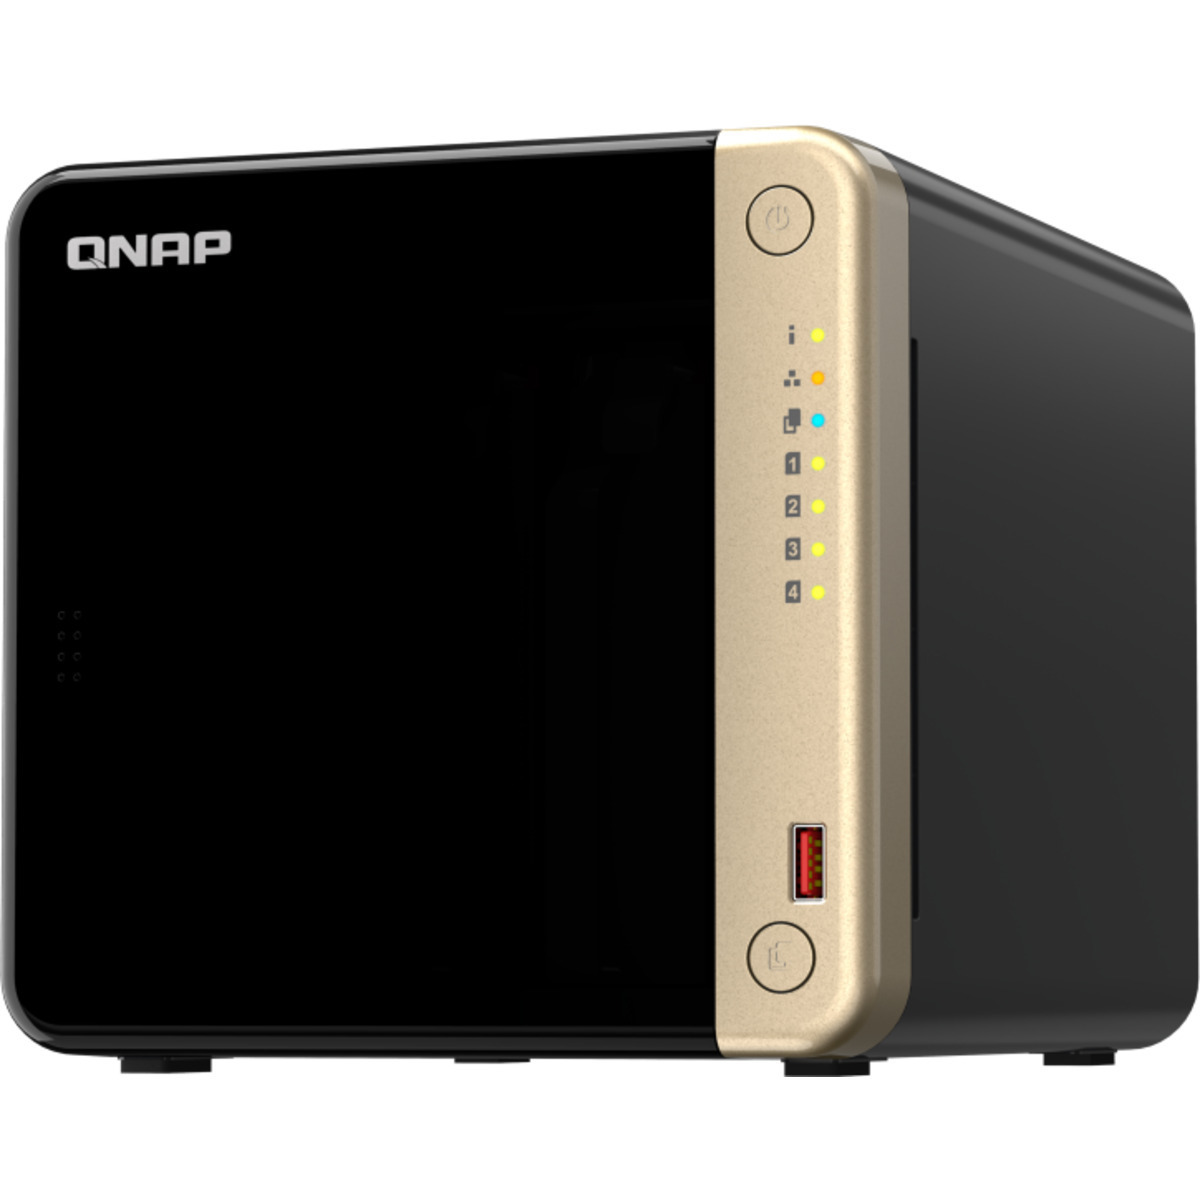 QNAP TS-464 96tb 4-Bay Desktop Multimedia / Power User / Business NAS - Network Attached Storage Device 4x24tb Western Digital Red Pro WD240KFGX 3.5 7200rpm SATA 6Gb/s HDD NAS Class Drives Installed - Burn-In Tested TS-464